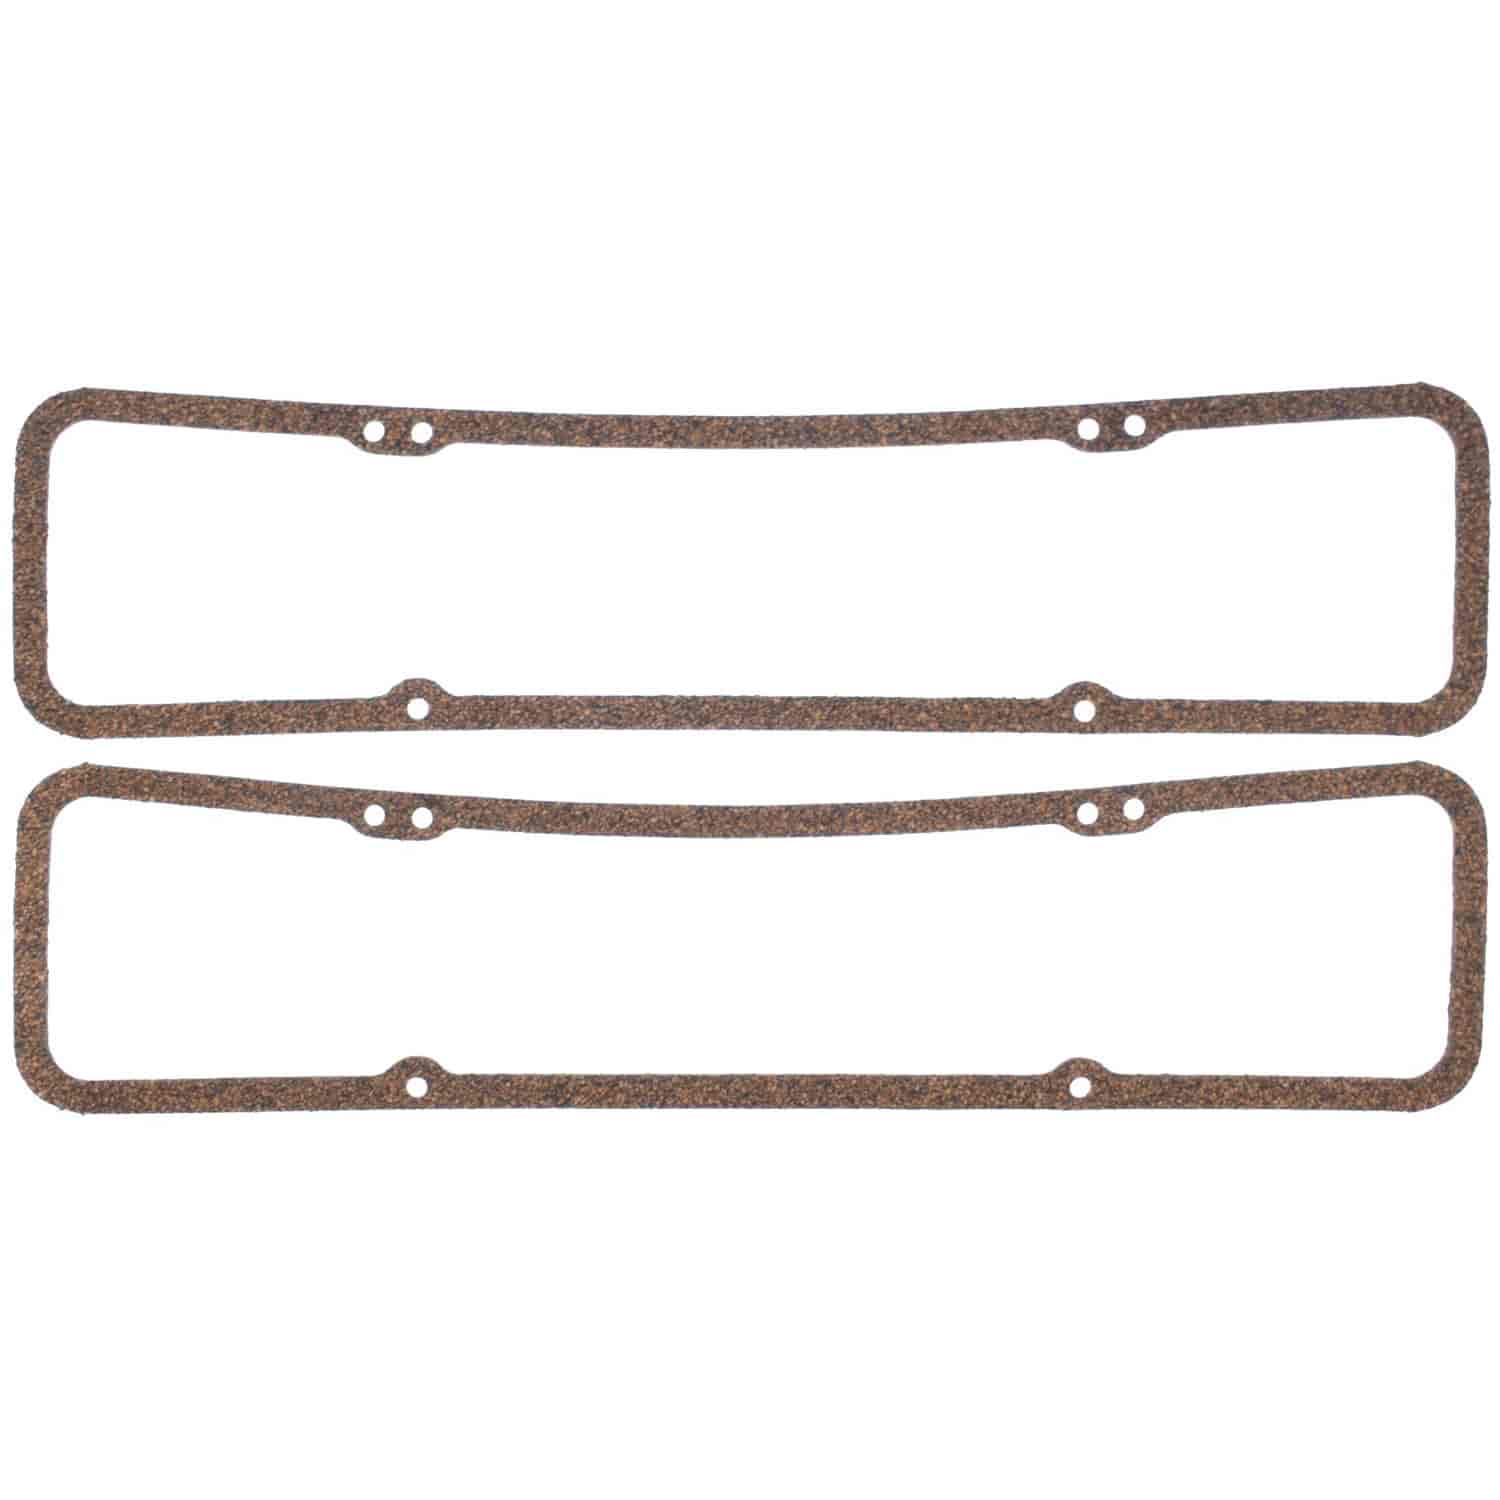 Valve Cover Gasket Set 1955-1986 Small Block Chevy 265/283/302/305/307/327/350/400 in Cork-Rubber